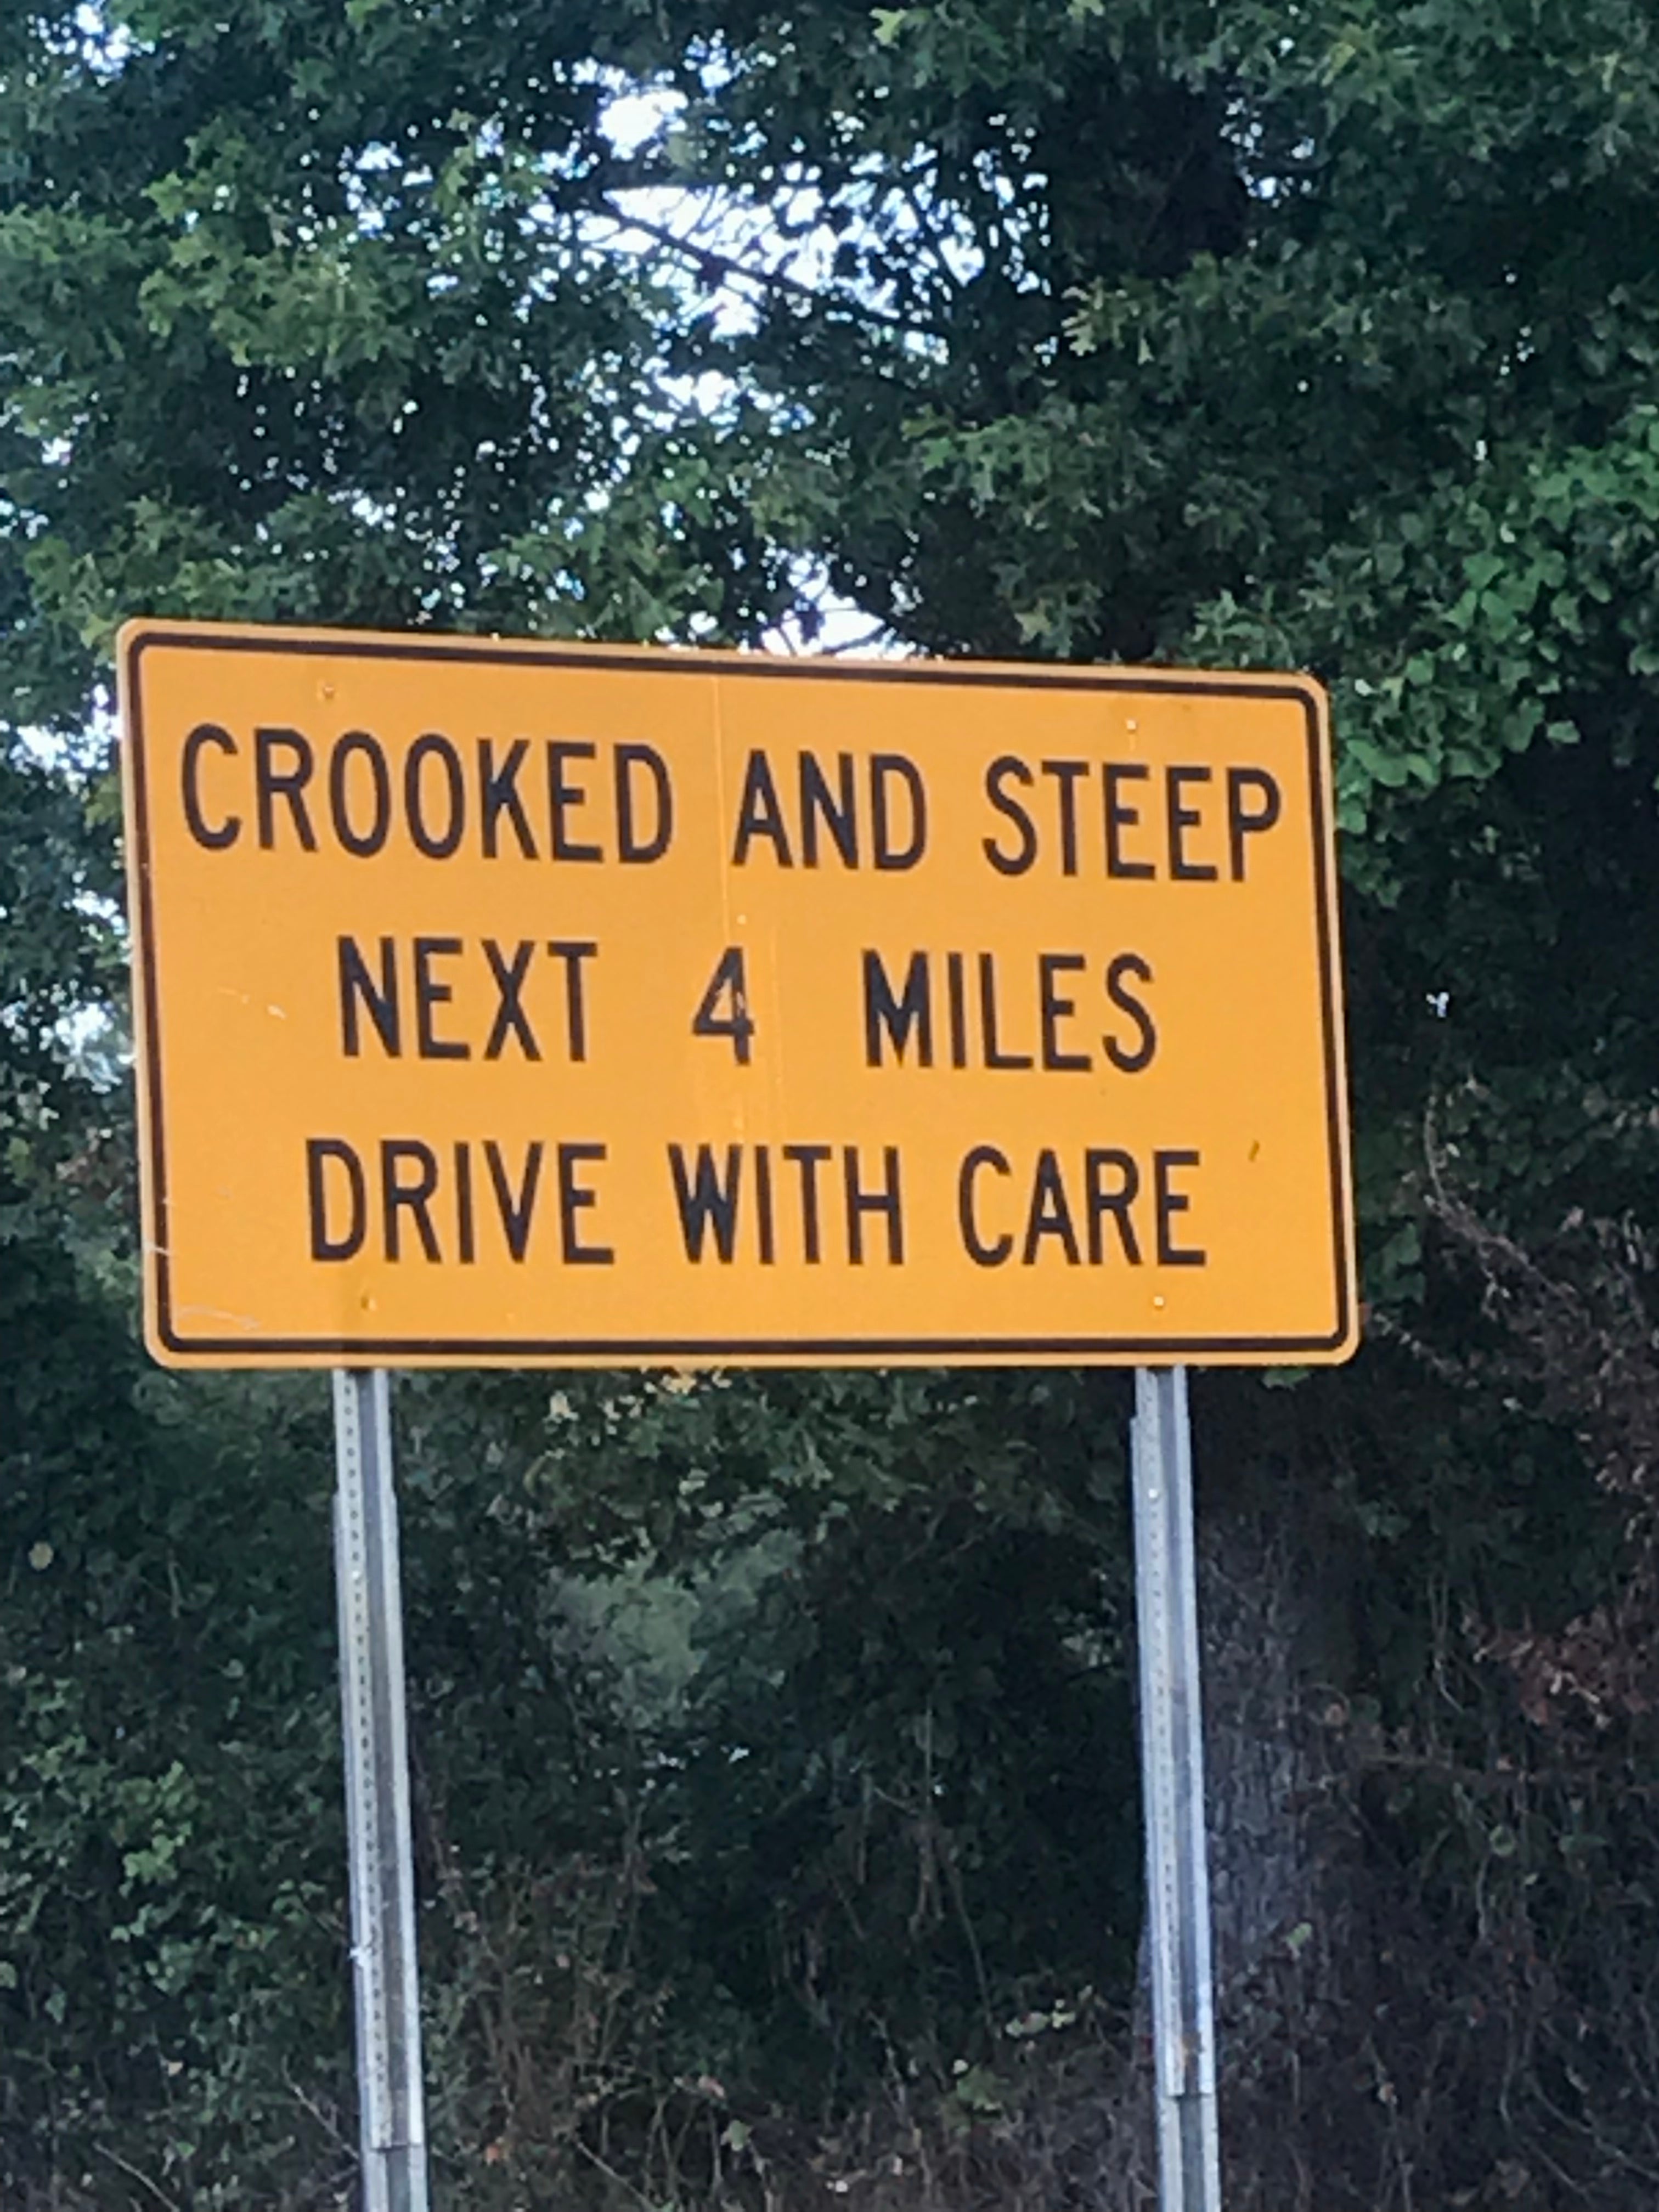 An accurate road sign